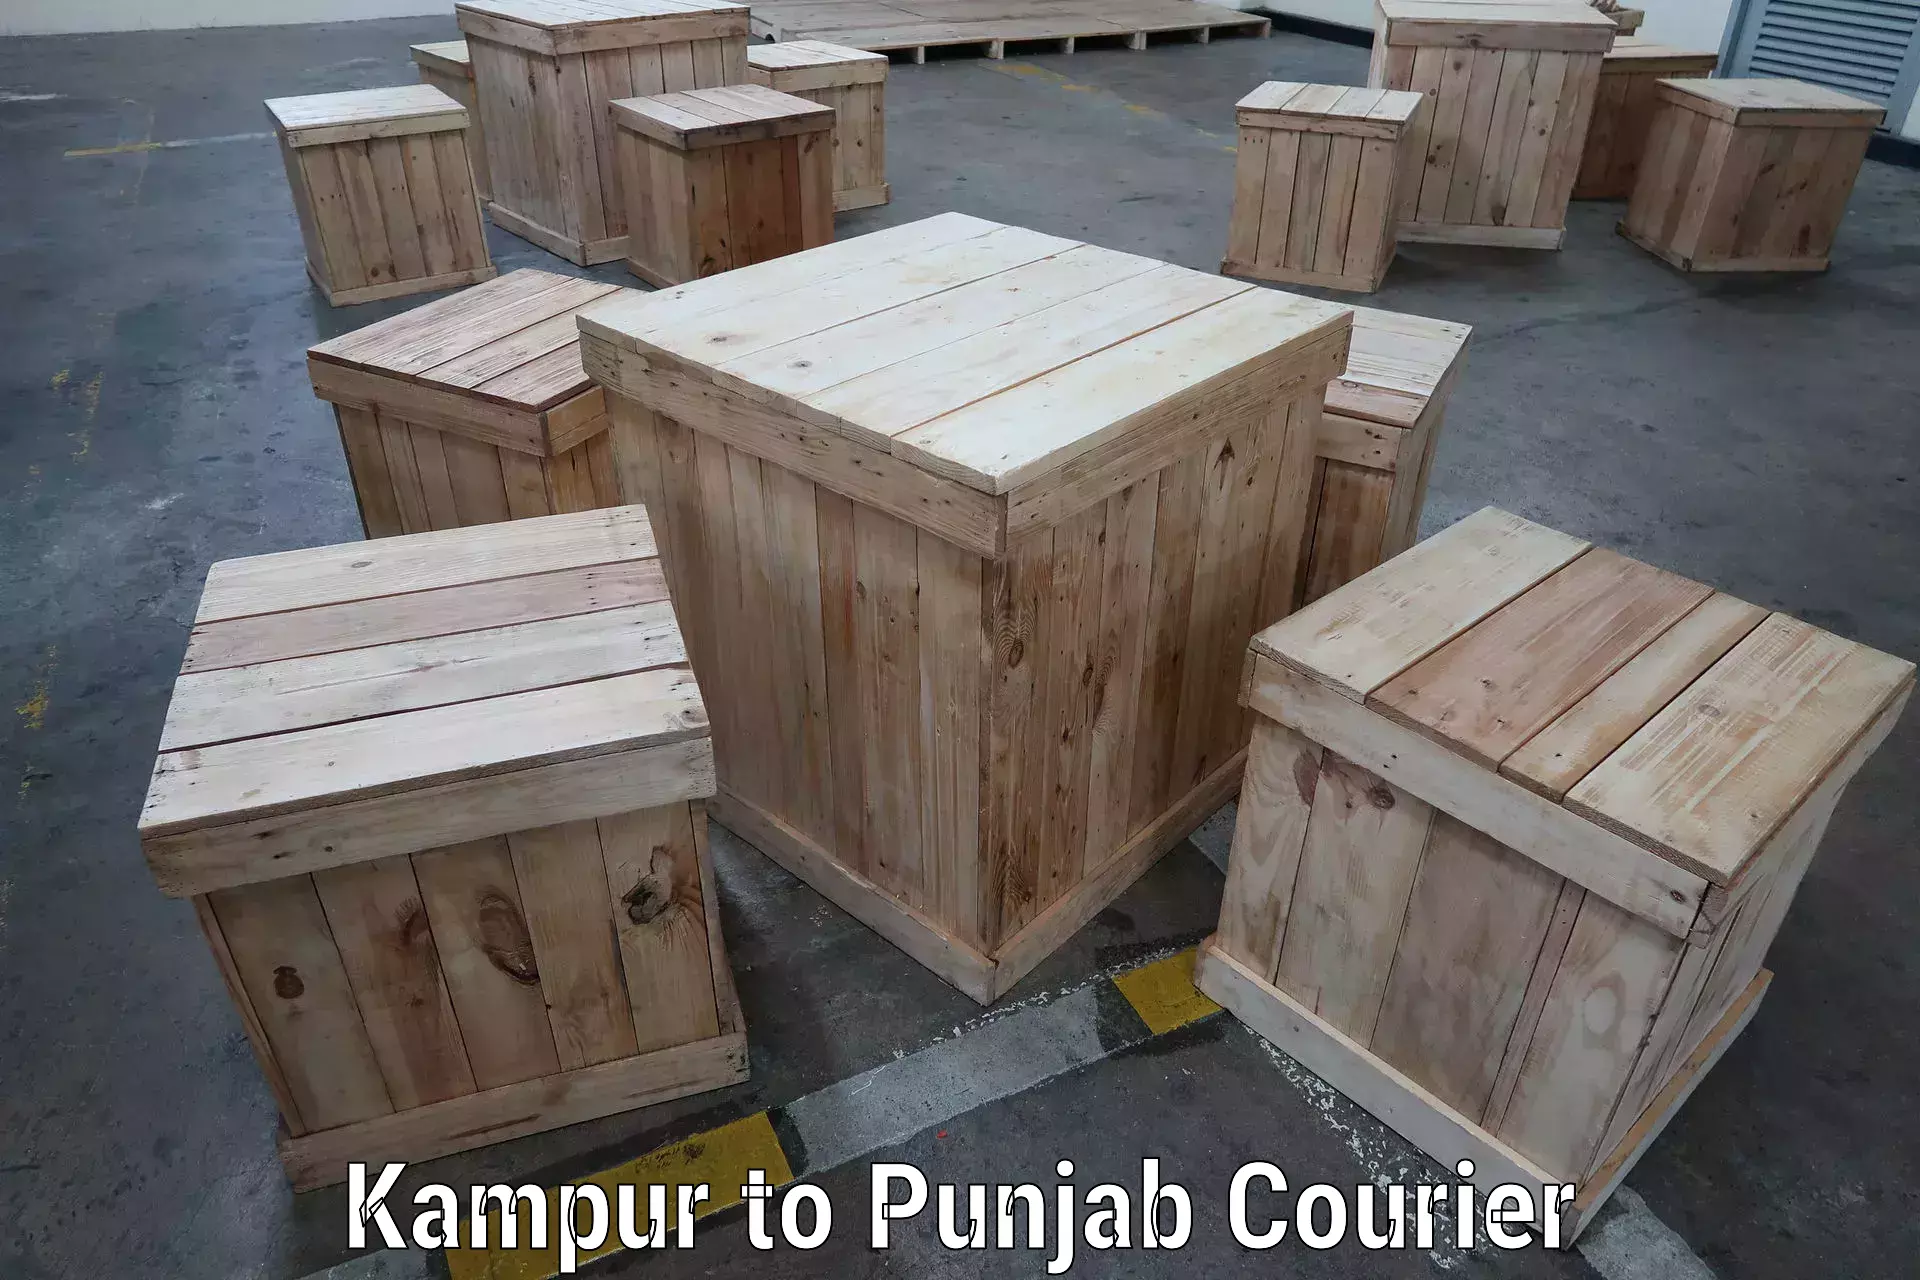 E-commerce fulfillment in Kampur to Punjab